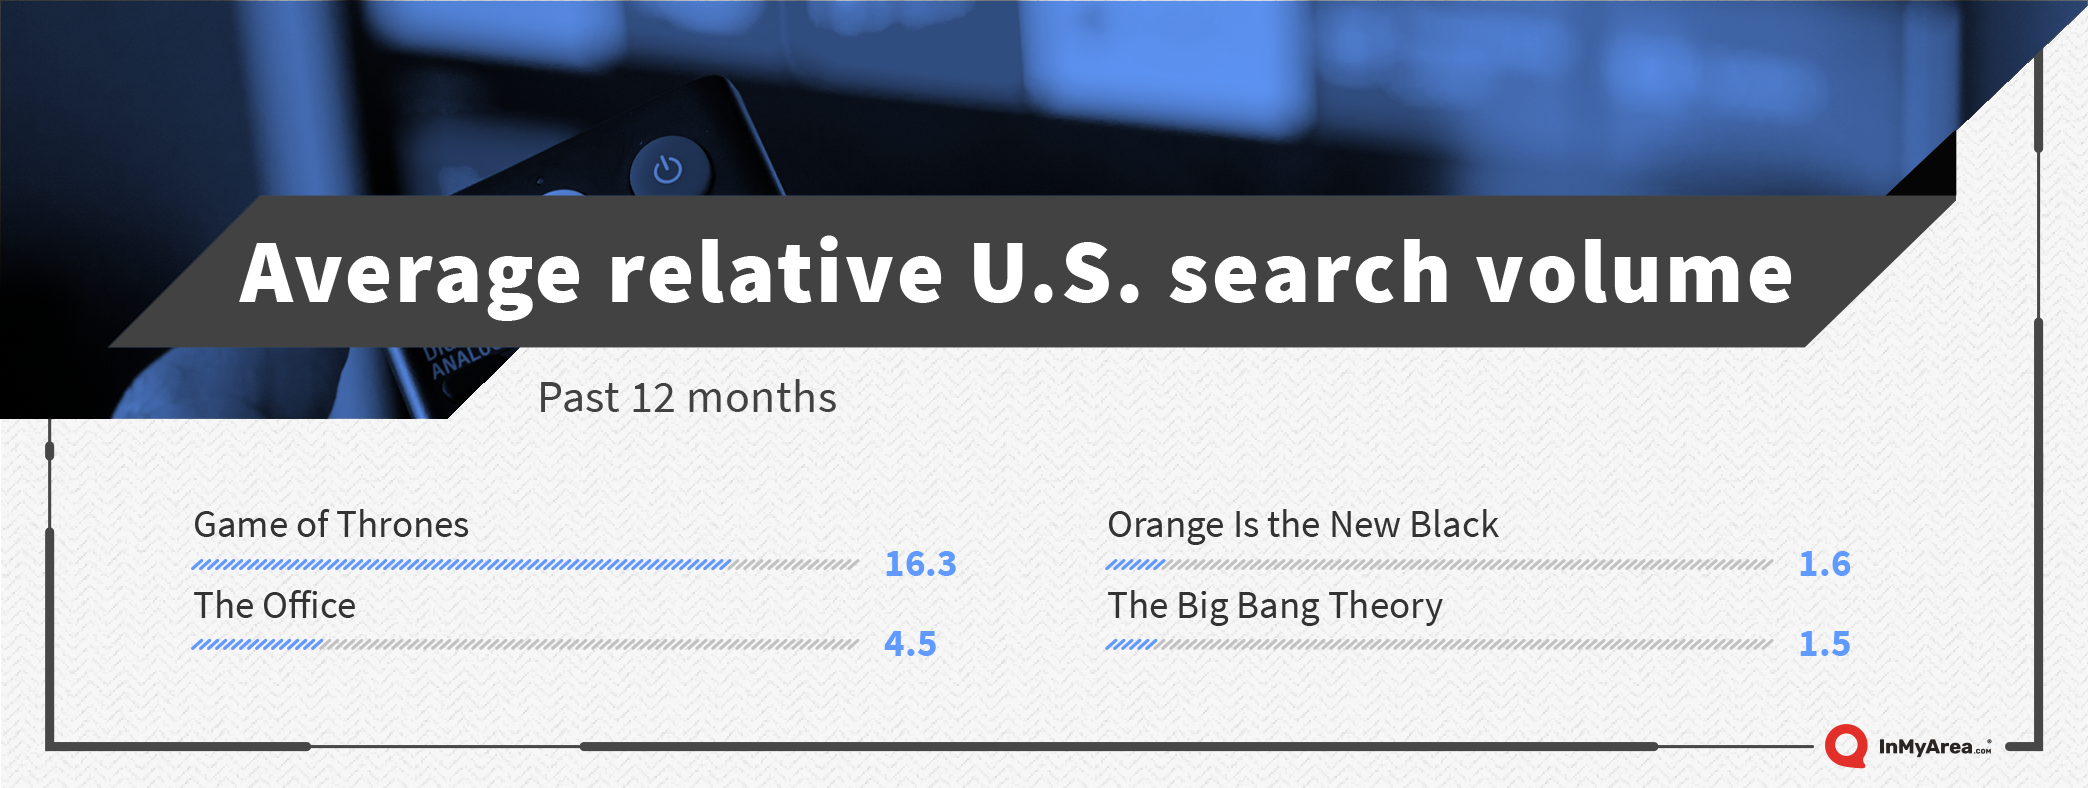 Average relative U.S. shows search volume for the past 12 months